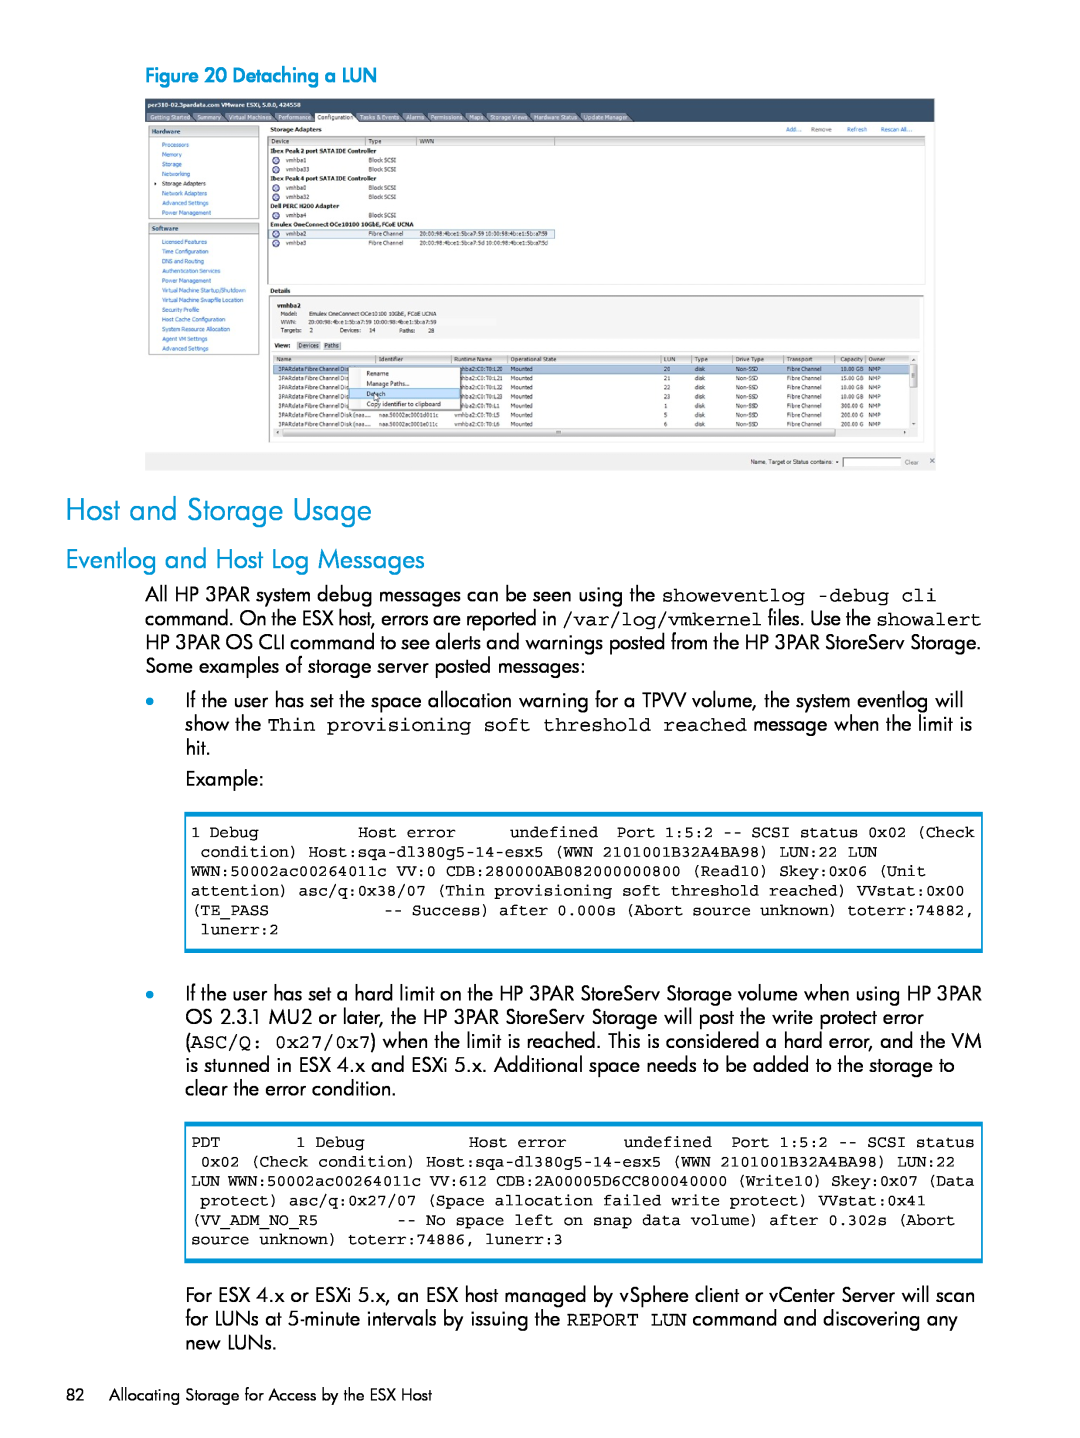 HP QR516B manual Host and Storage Usage, Eventlog and Host Log Messages, Detaching a LUN 